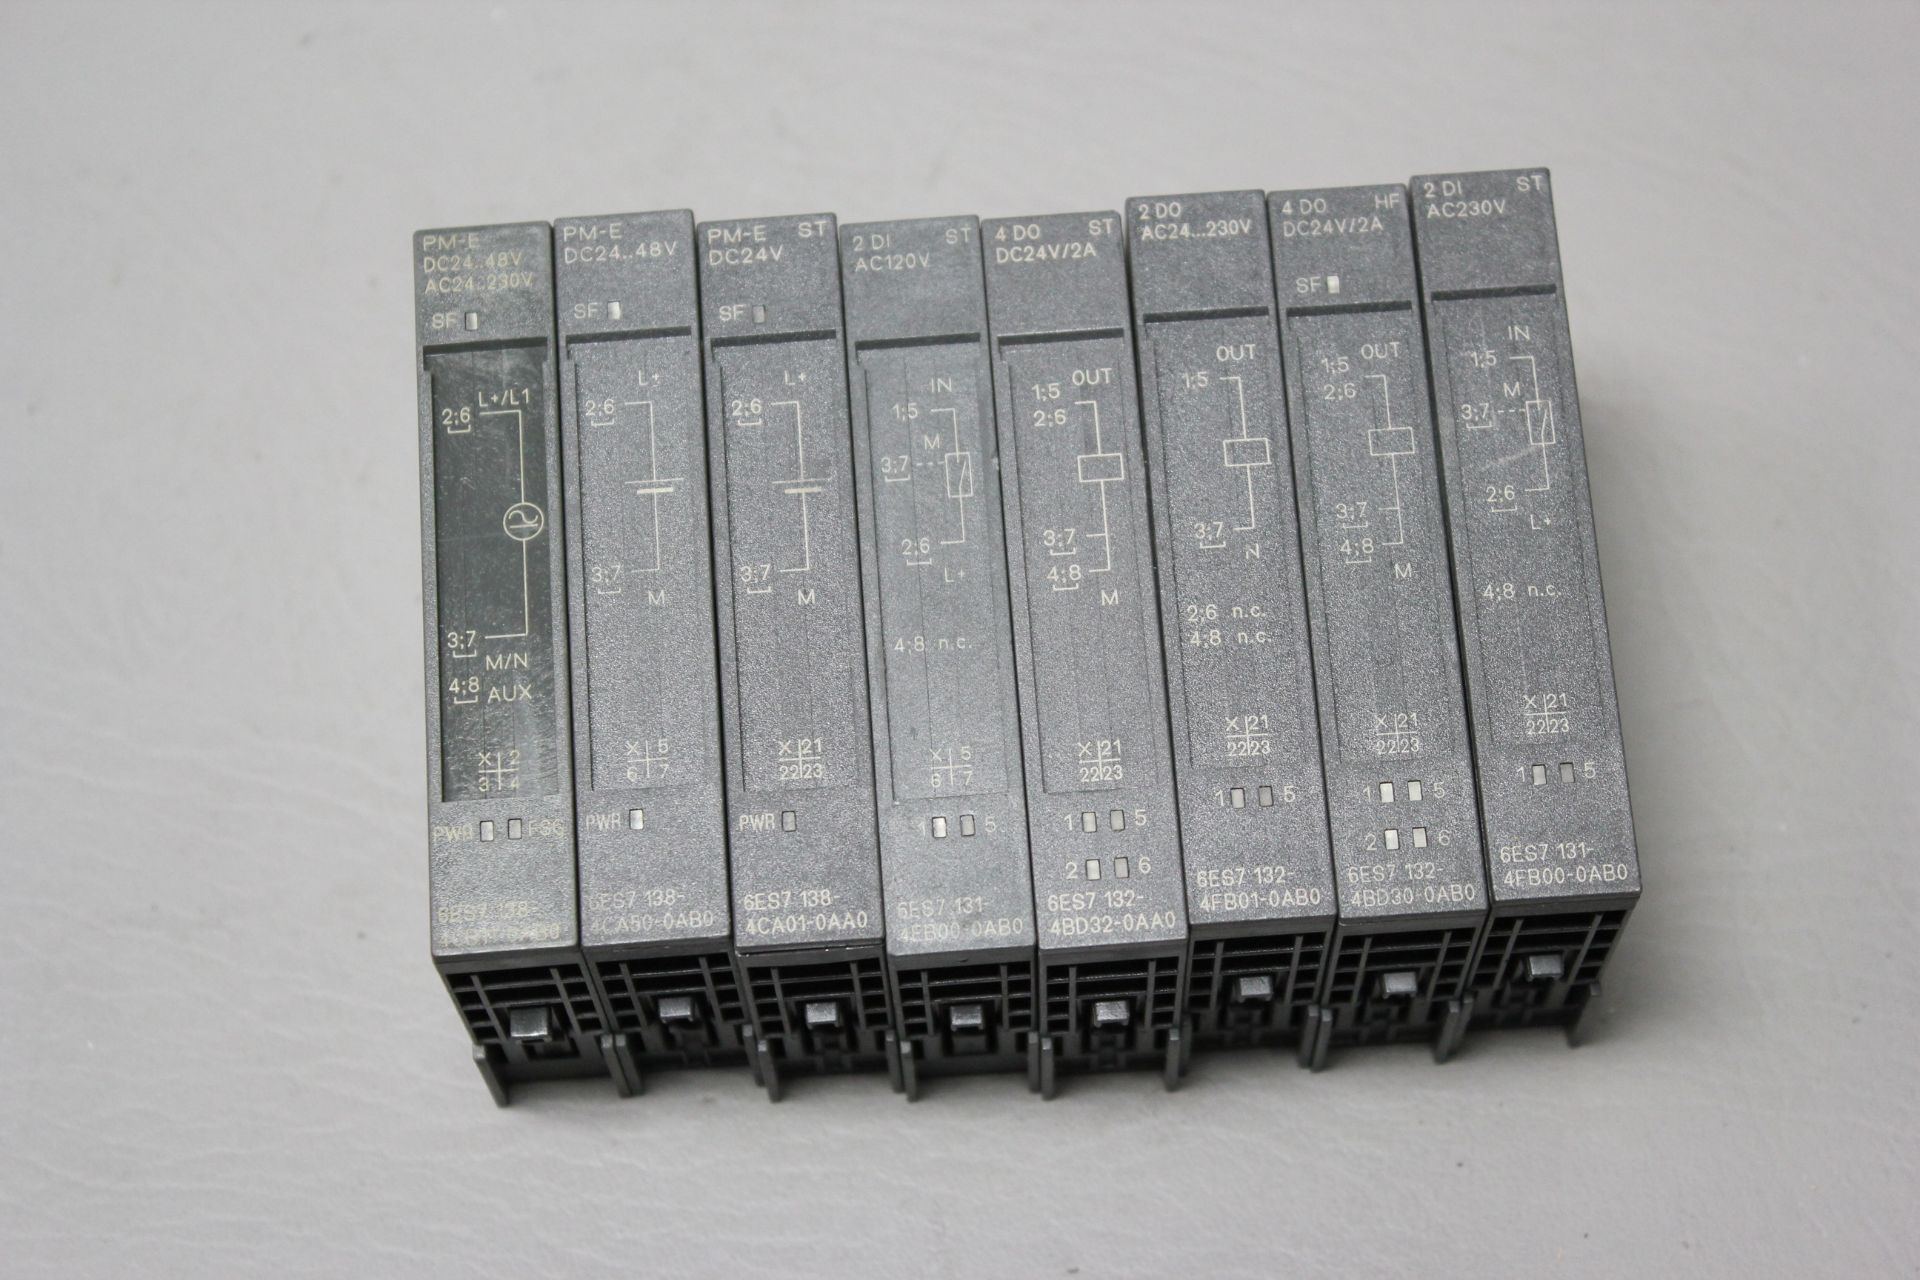 LOT OF 8 SIEMENS ELECTRONIC MODULES